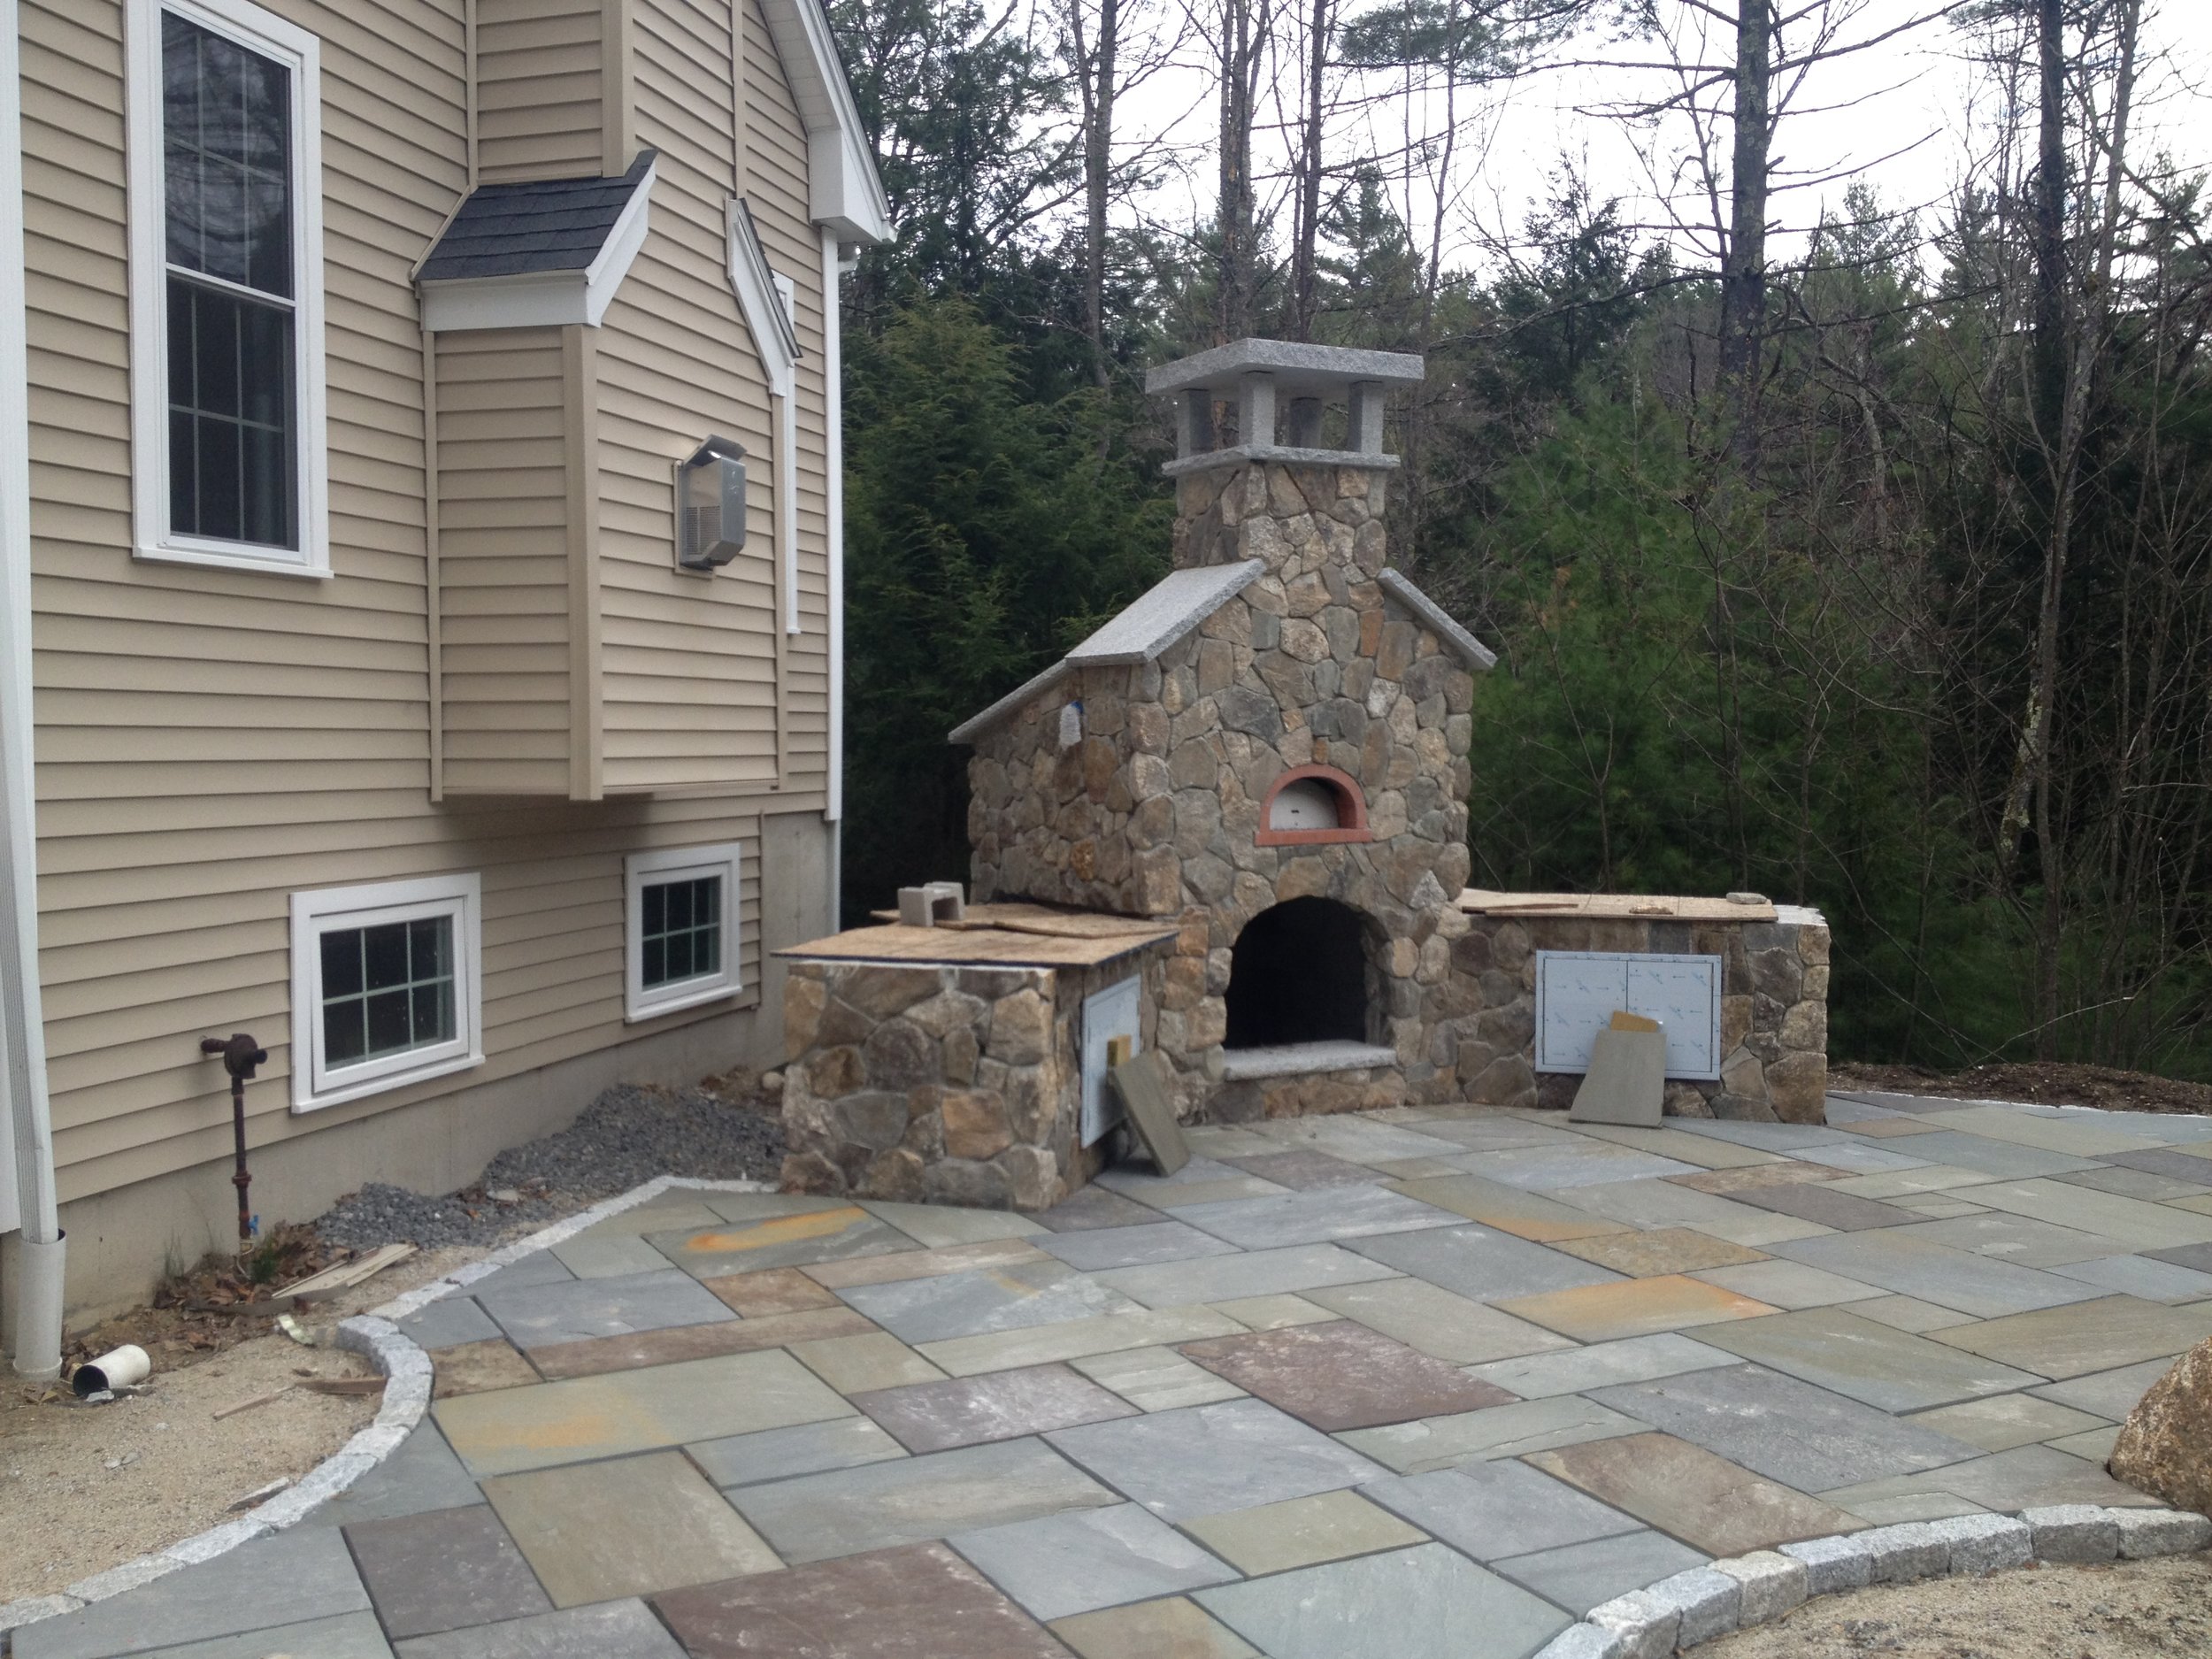 Landscaping in Hollis, including outdoor kitchen with masonry isntallation